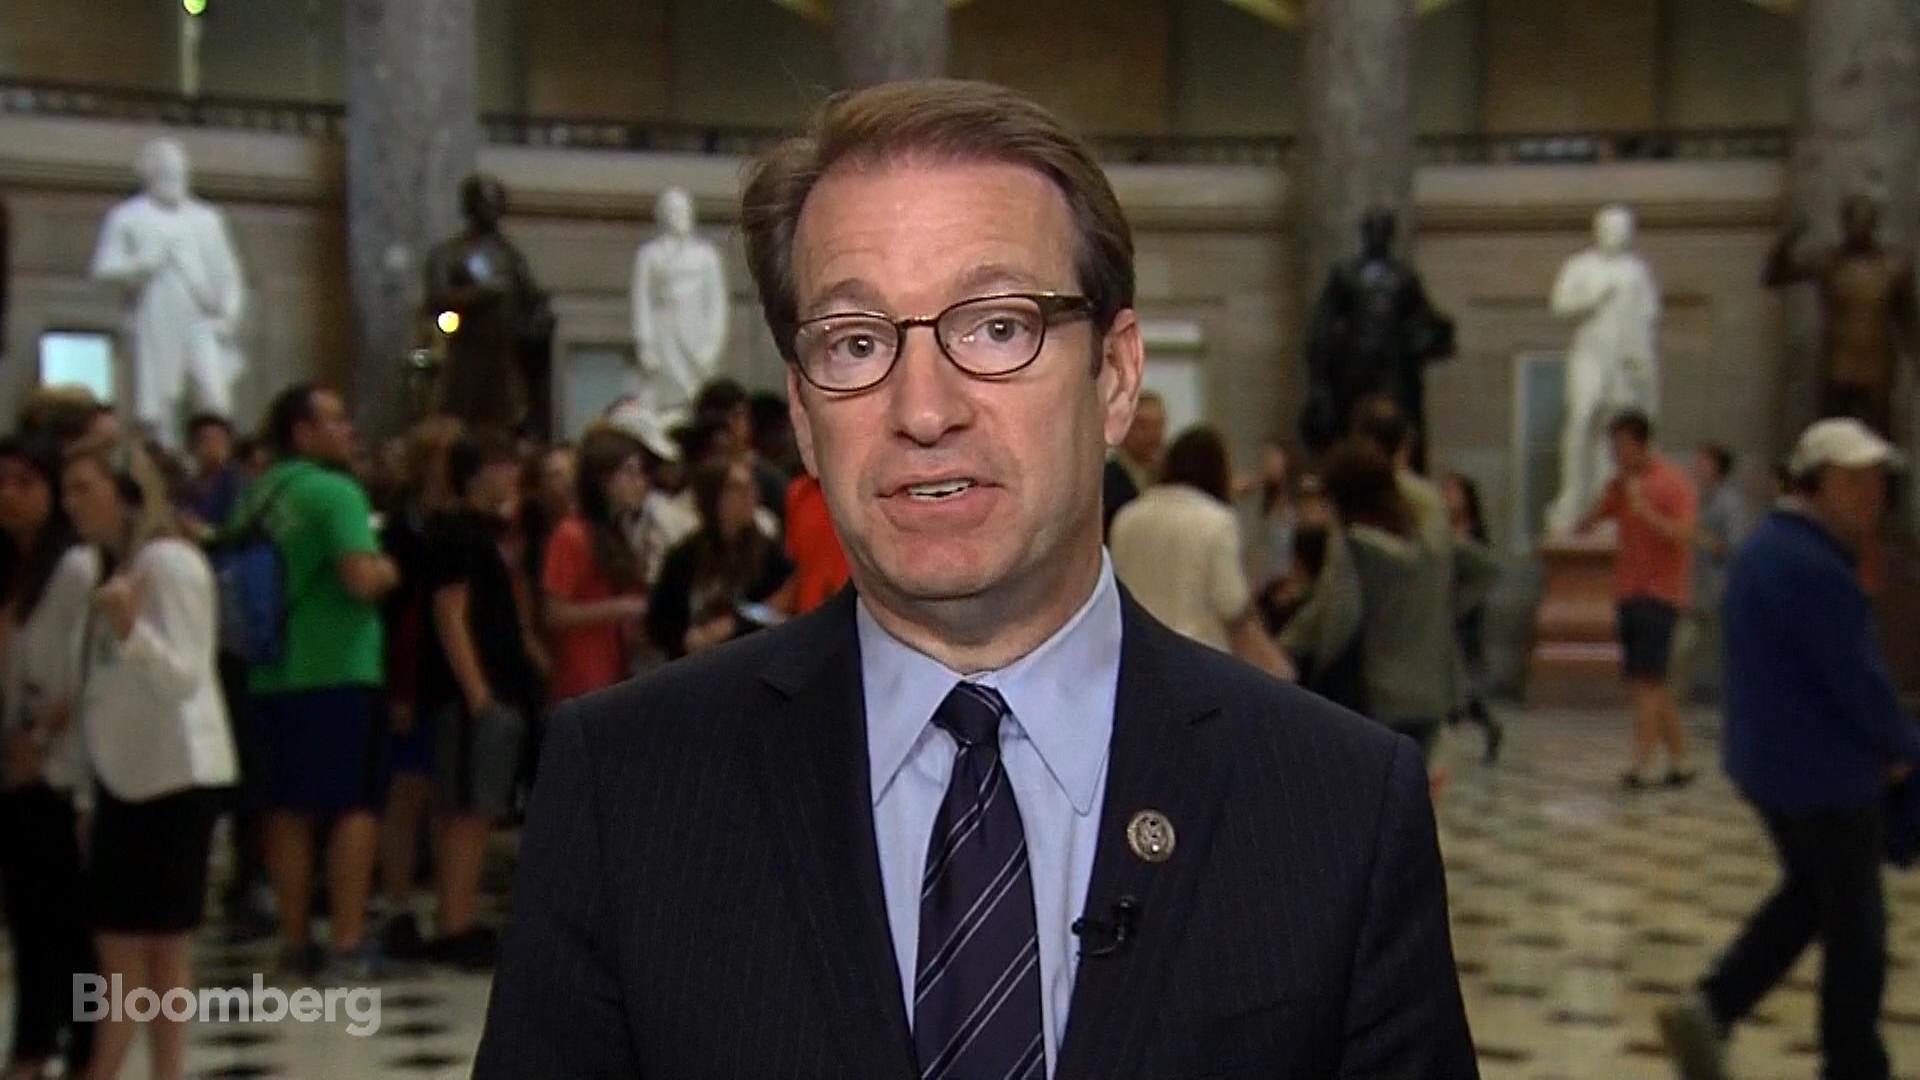 Rep. Roskam Sees Tax Reform Passing This Year - Bloomberg